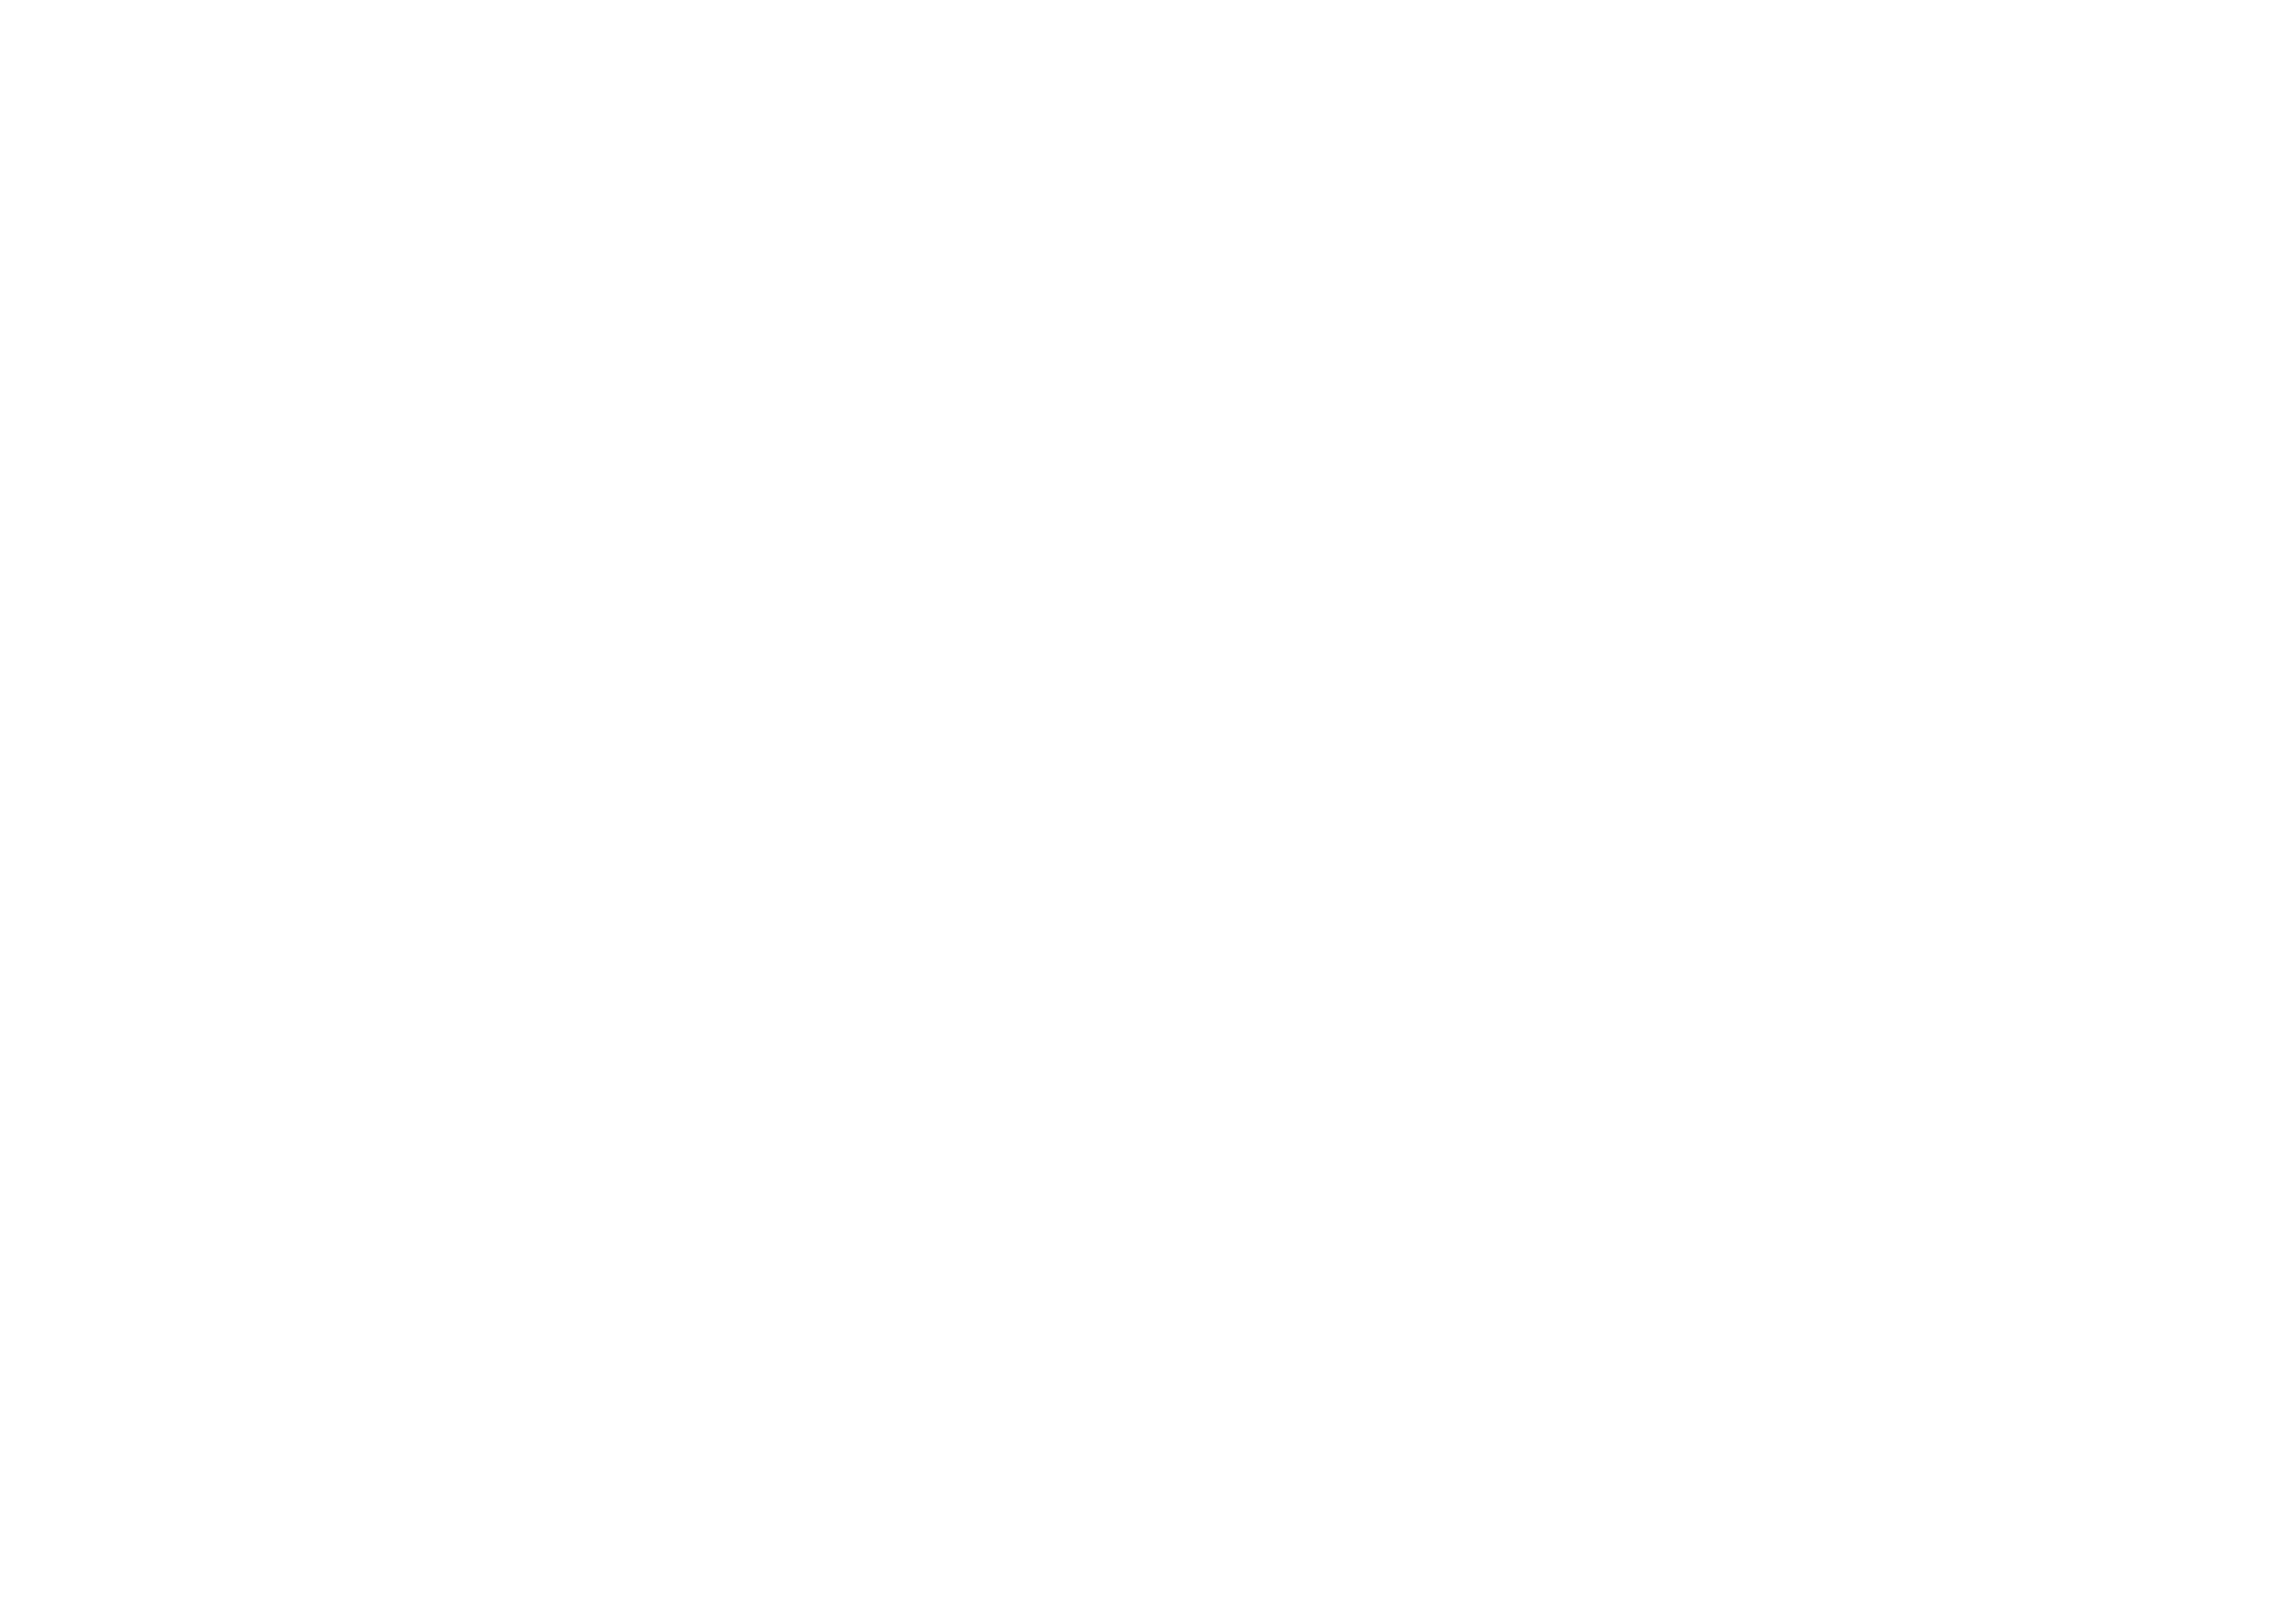 Department of Licensing and Consumer Protection